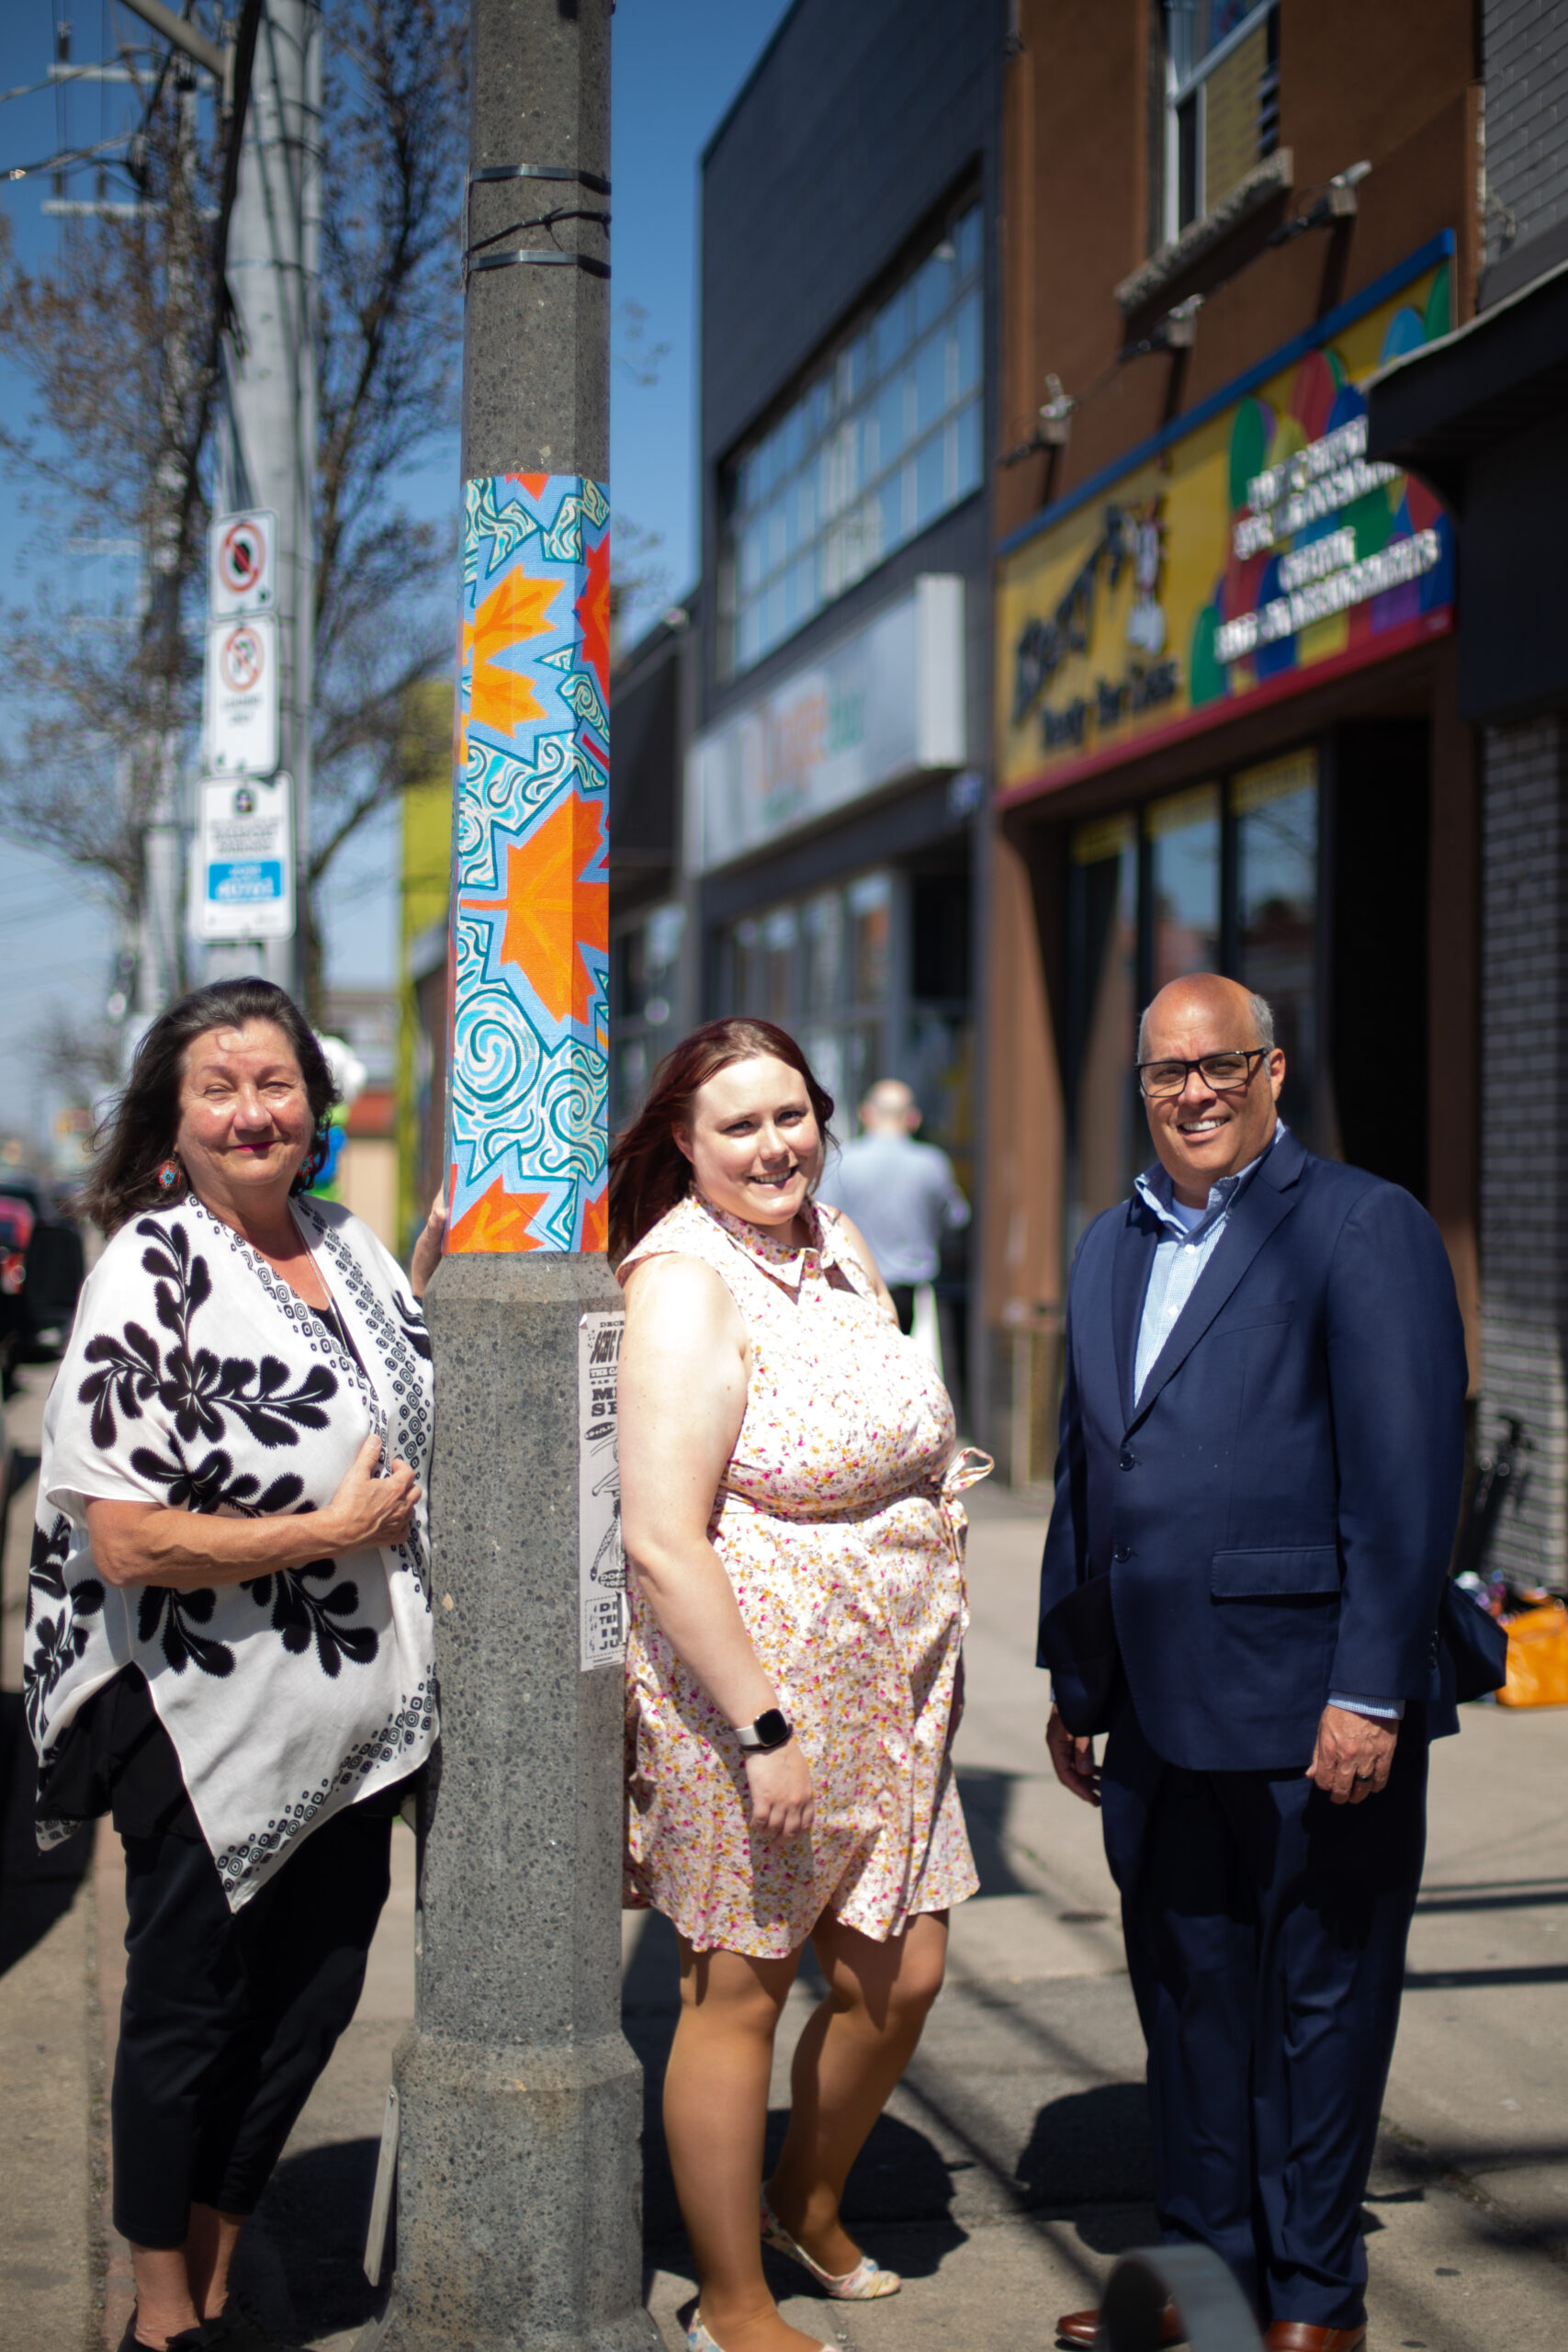 Sharon Trottier and representatives from Ottawa Street BIA and RBC celebrate the series of vinyl lamp post murals along Ottawa St N